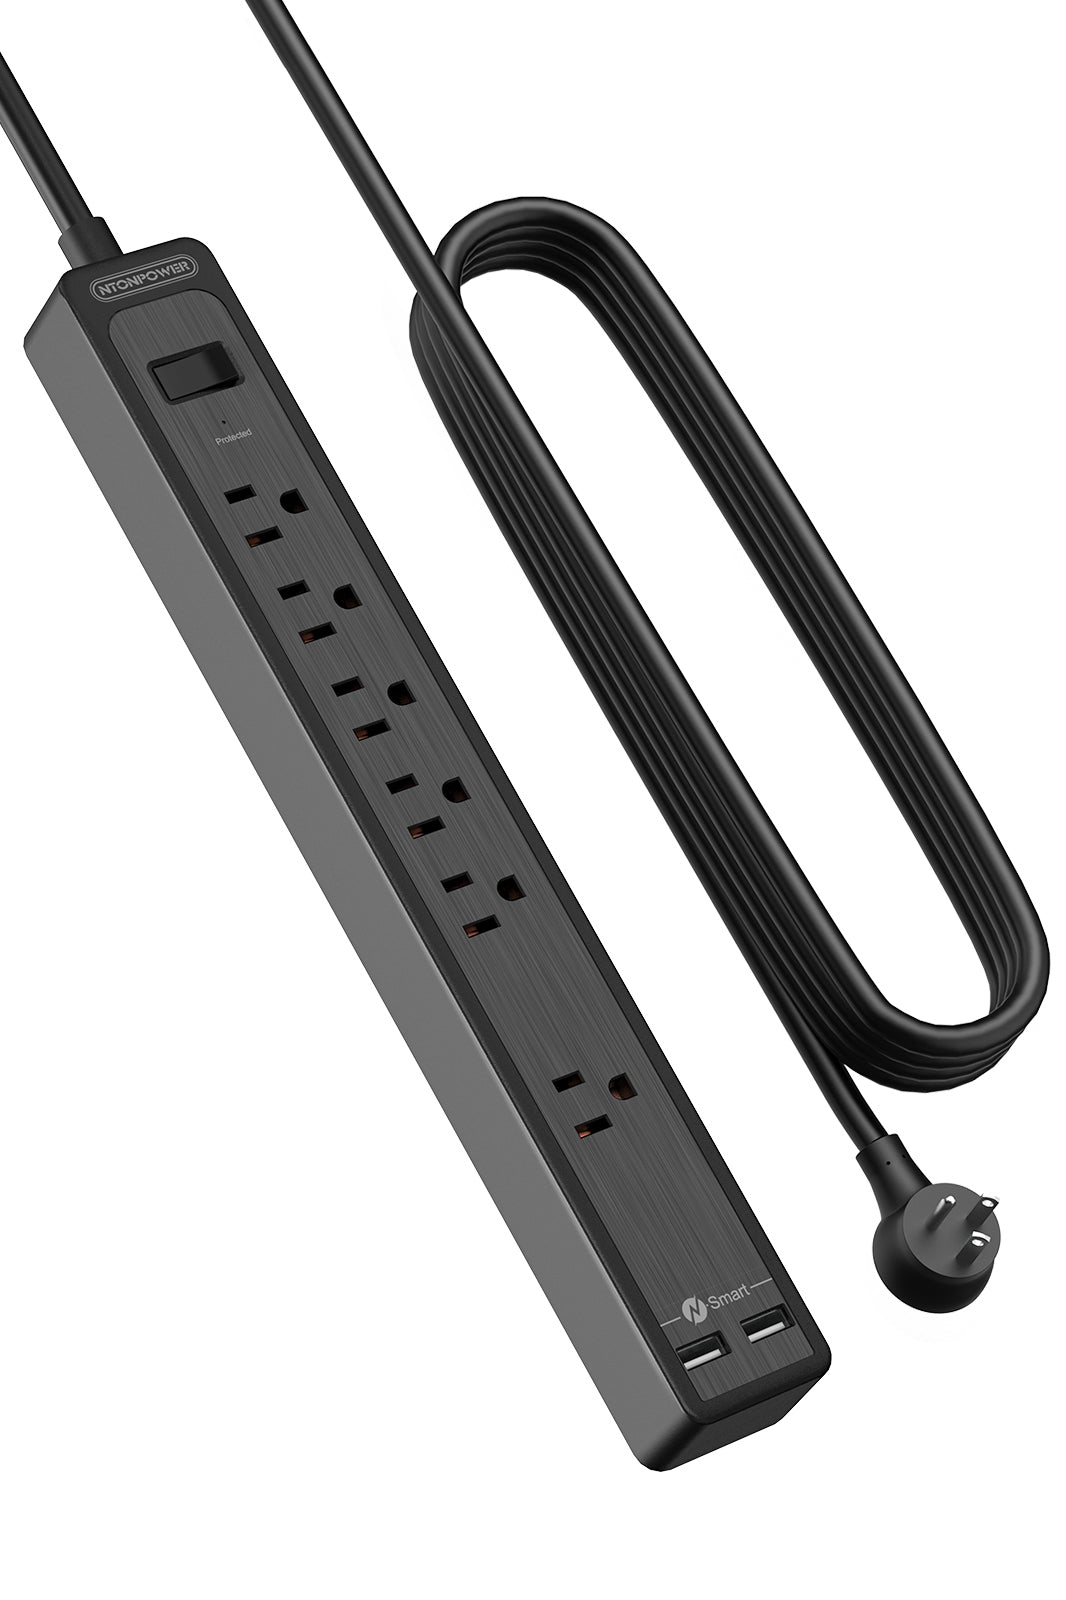 Ntonpower Surge Protector 6 Outlets  2 USB 500J